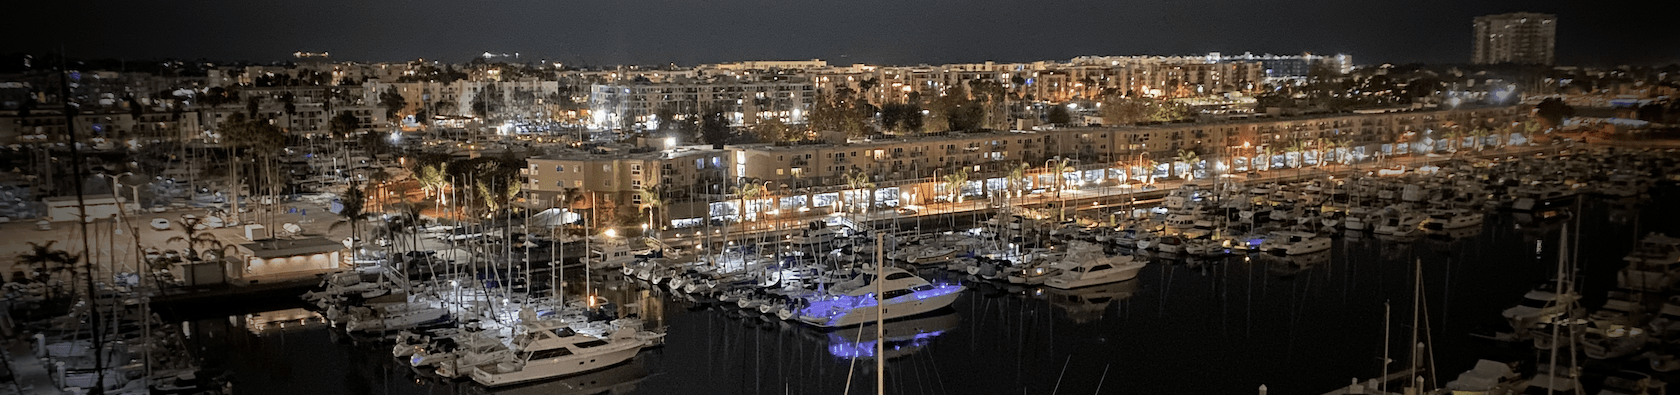 Boats in a marina at night, all lit up